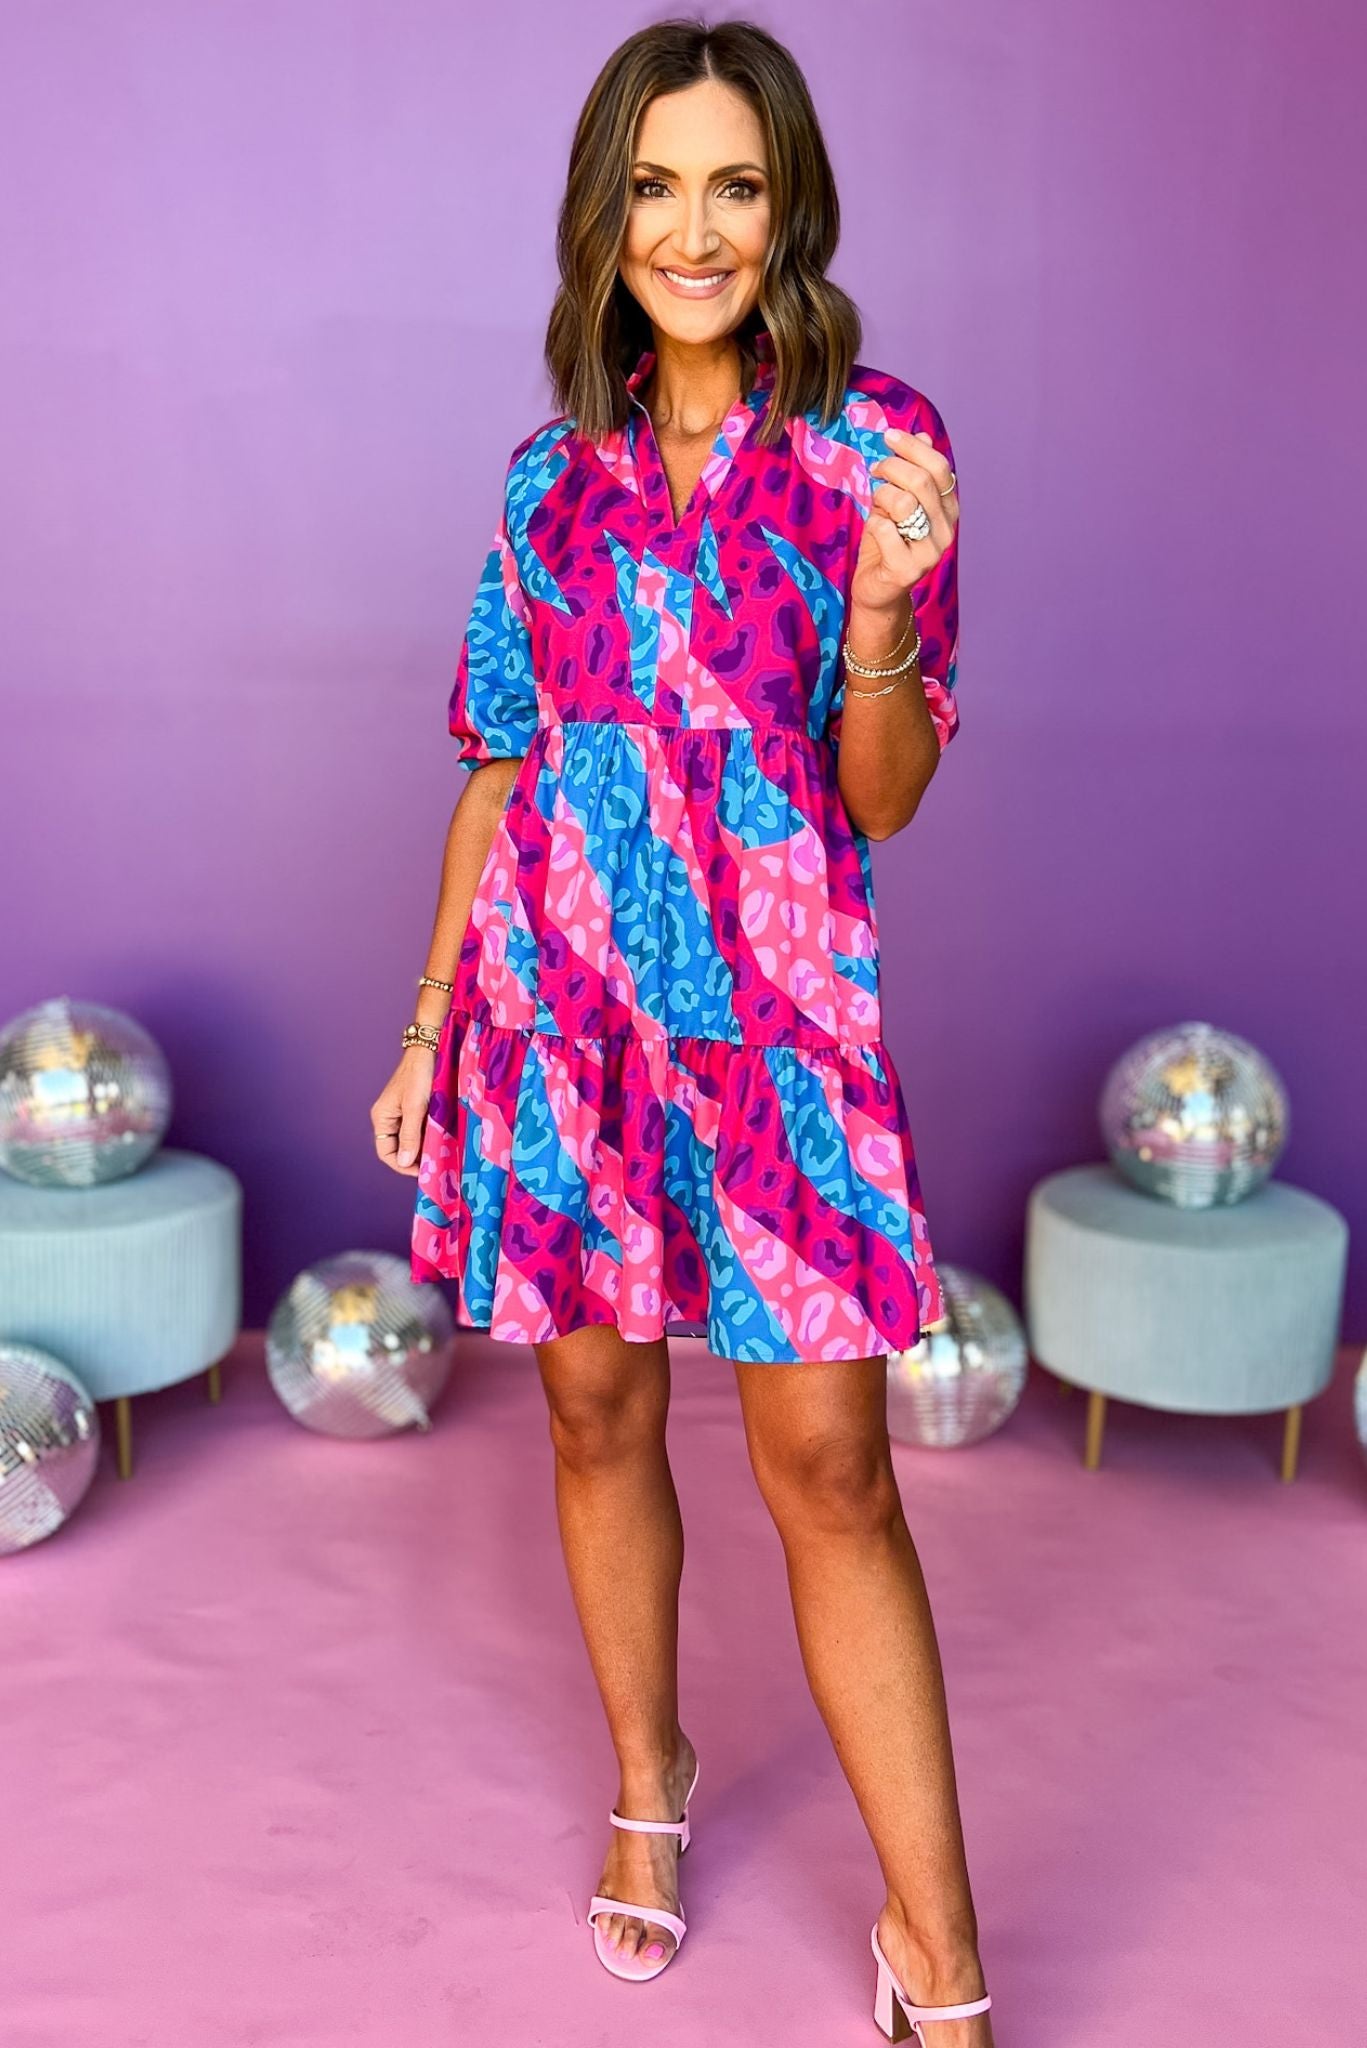 SSYS The Mix Print Tatum Dress In Camo Animal, ssys the label, ssys dress, printed dress, elevated dress, church dress, work dress, brunch dress, mix print dress, mom style, bright style, spring style, shop style your senses by Mallory Fitzsimmons, ssys by Mallory Fitzsimmons  Edit alt text